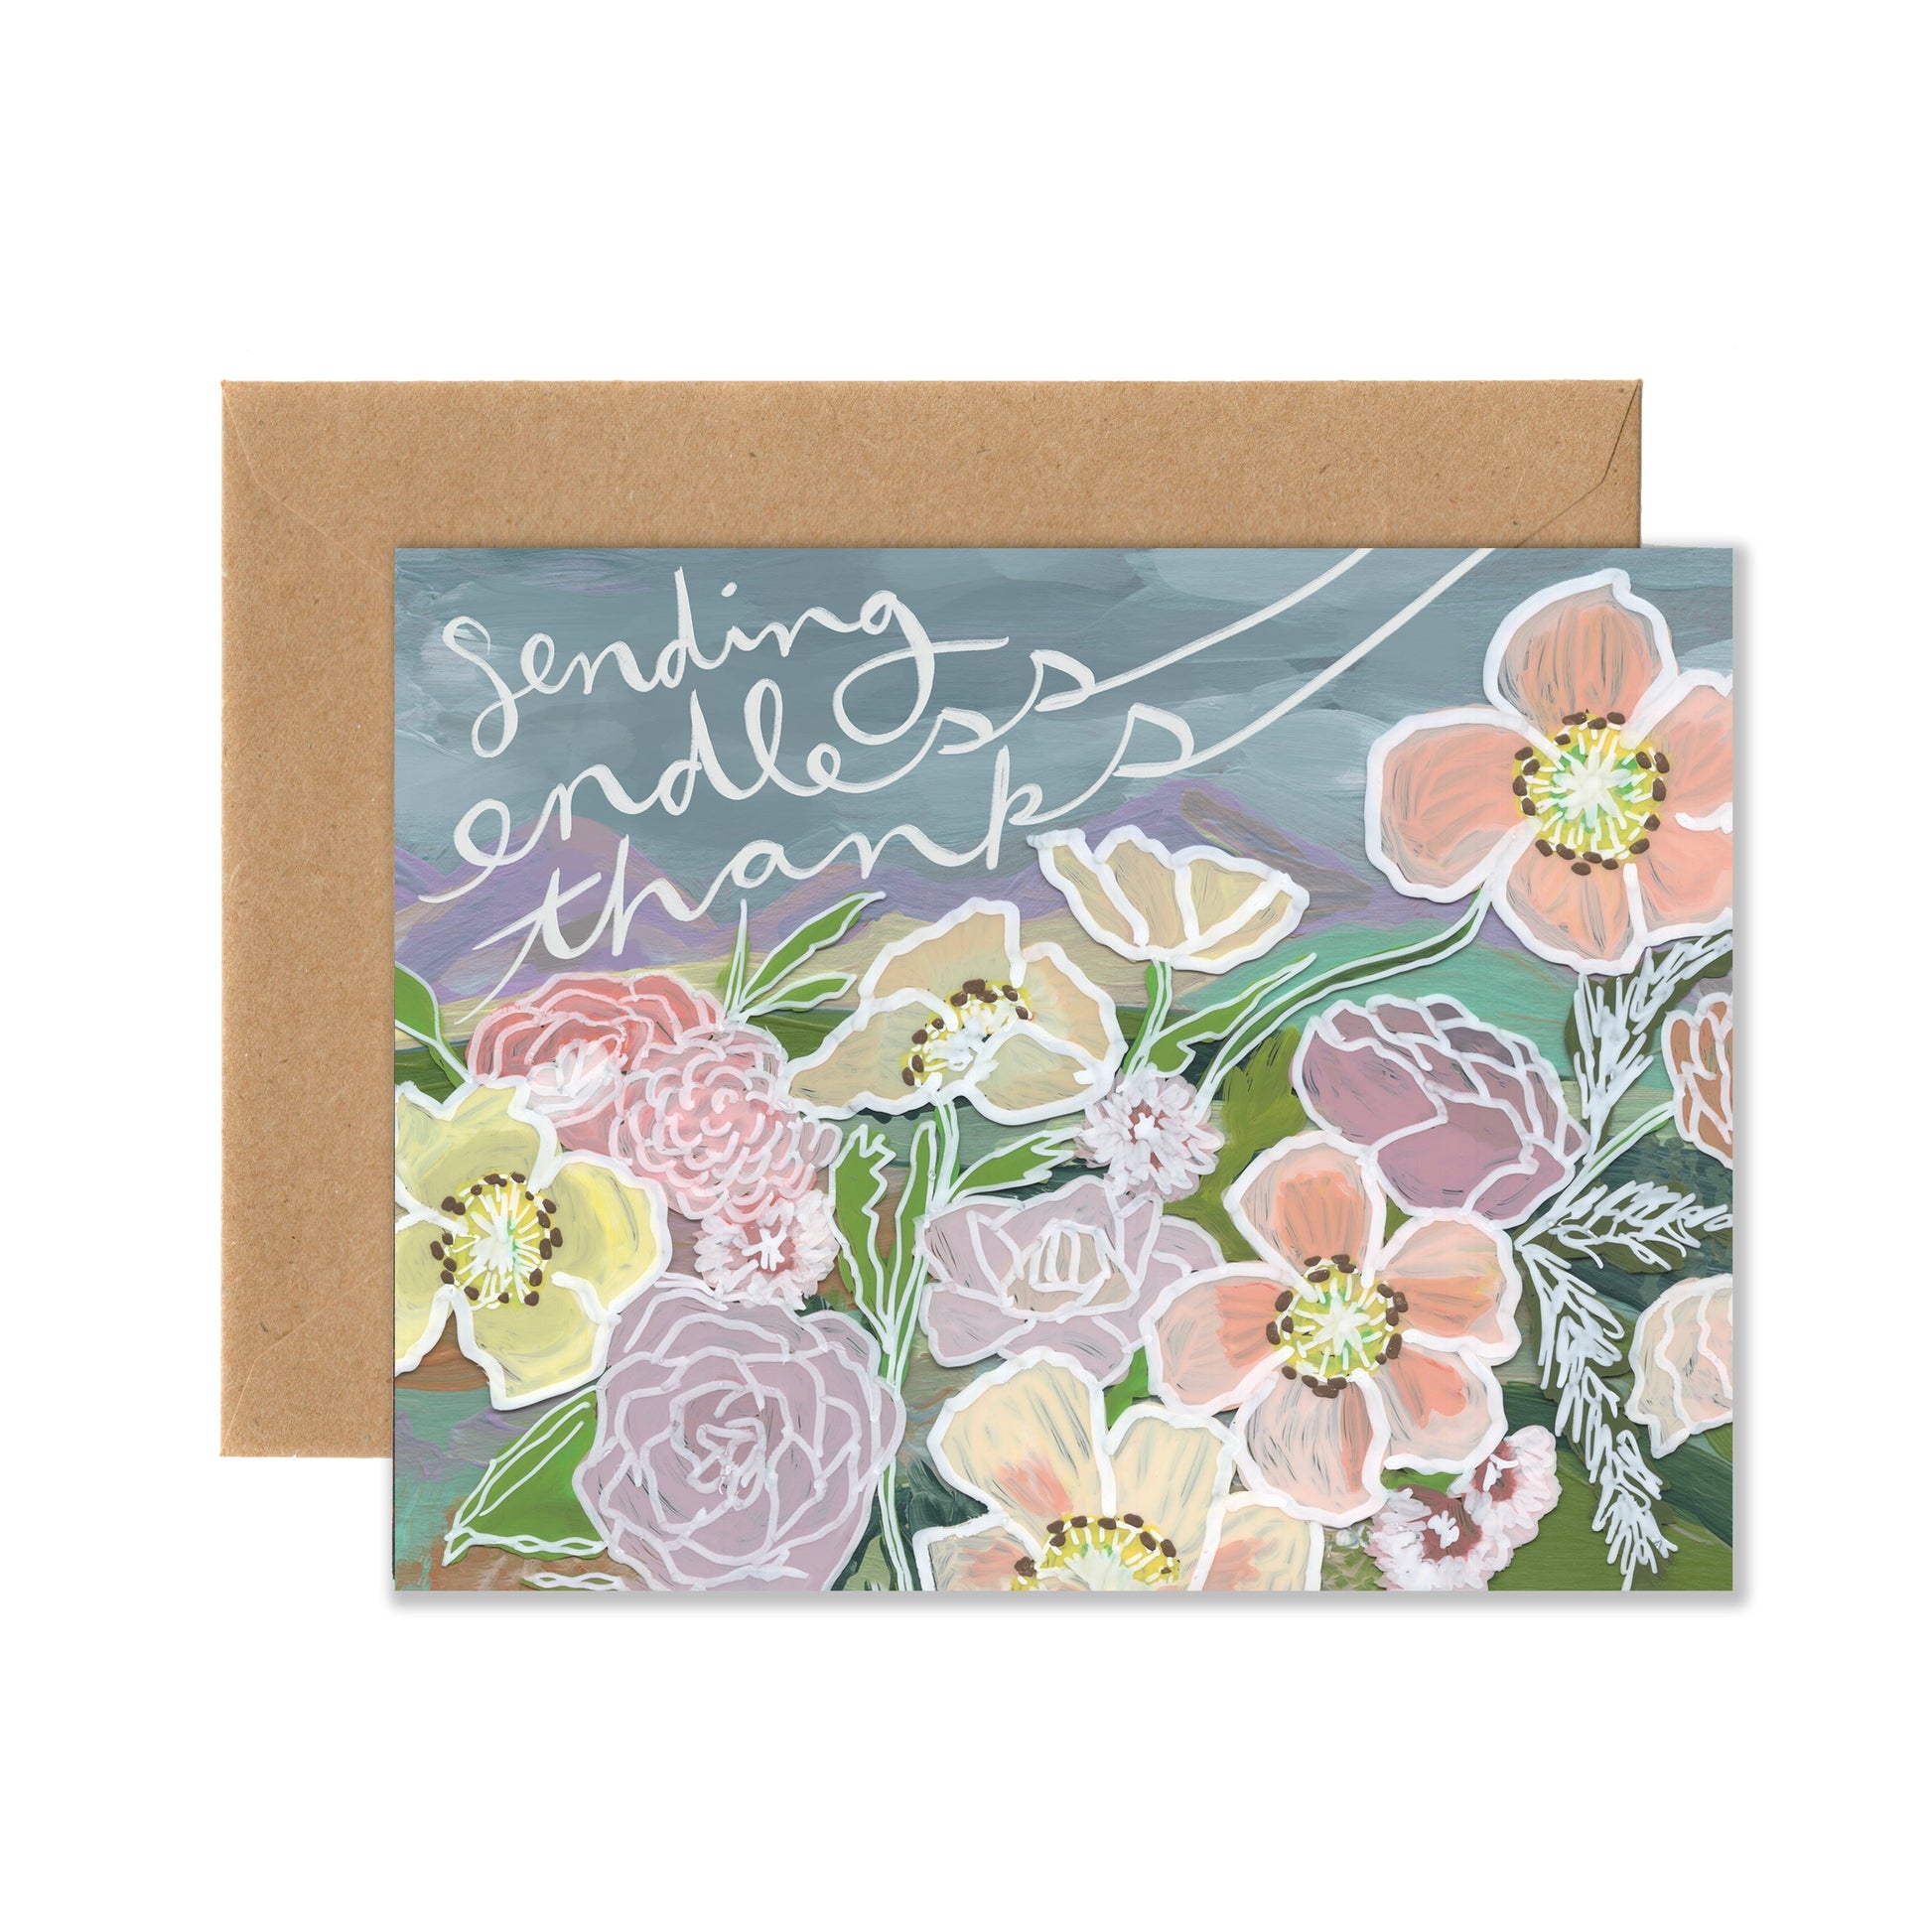 Sending Endless Thanks Florals (Single Card) A2 Card Tiny and Snail